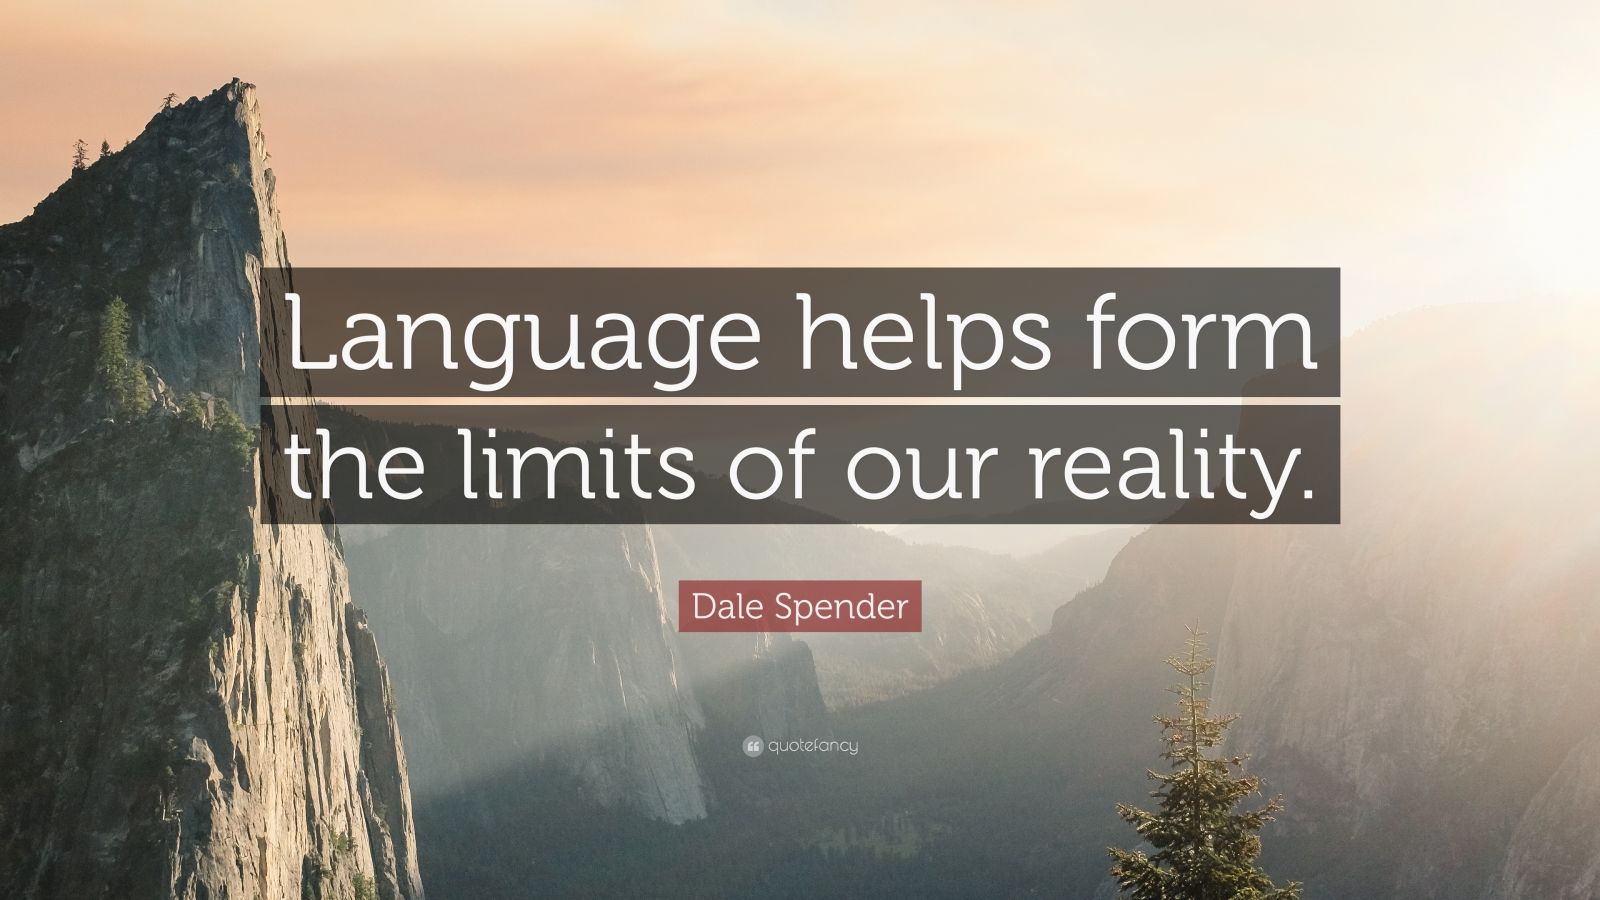 Man Made Language by Dale Spender